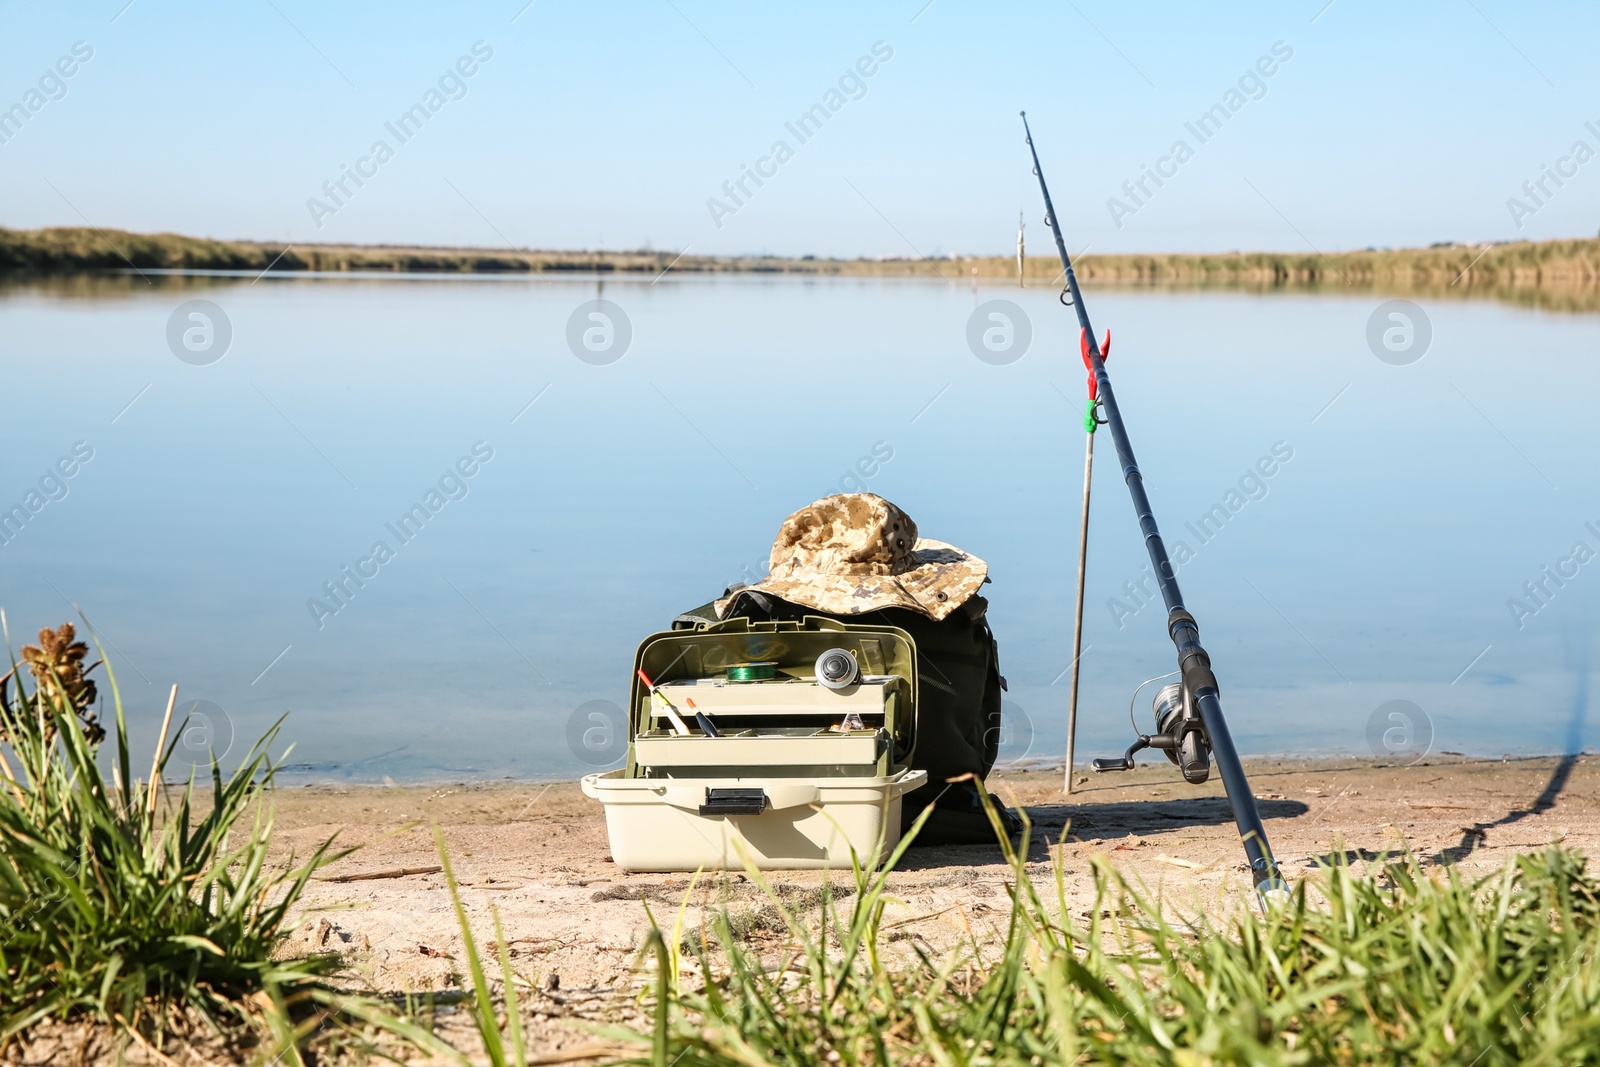 Photo of Rod and fishing essentials at riverside on sunny day